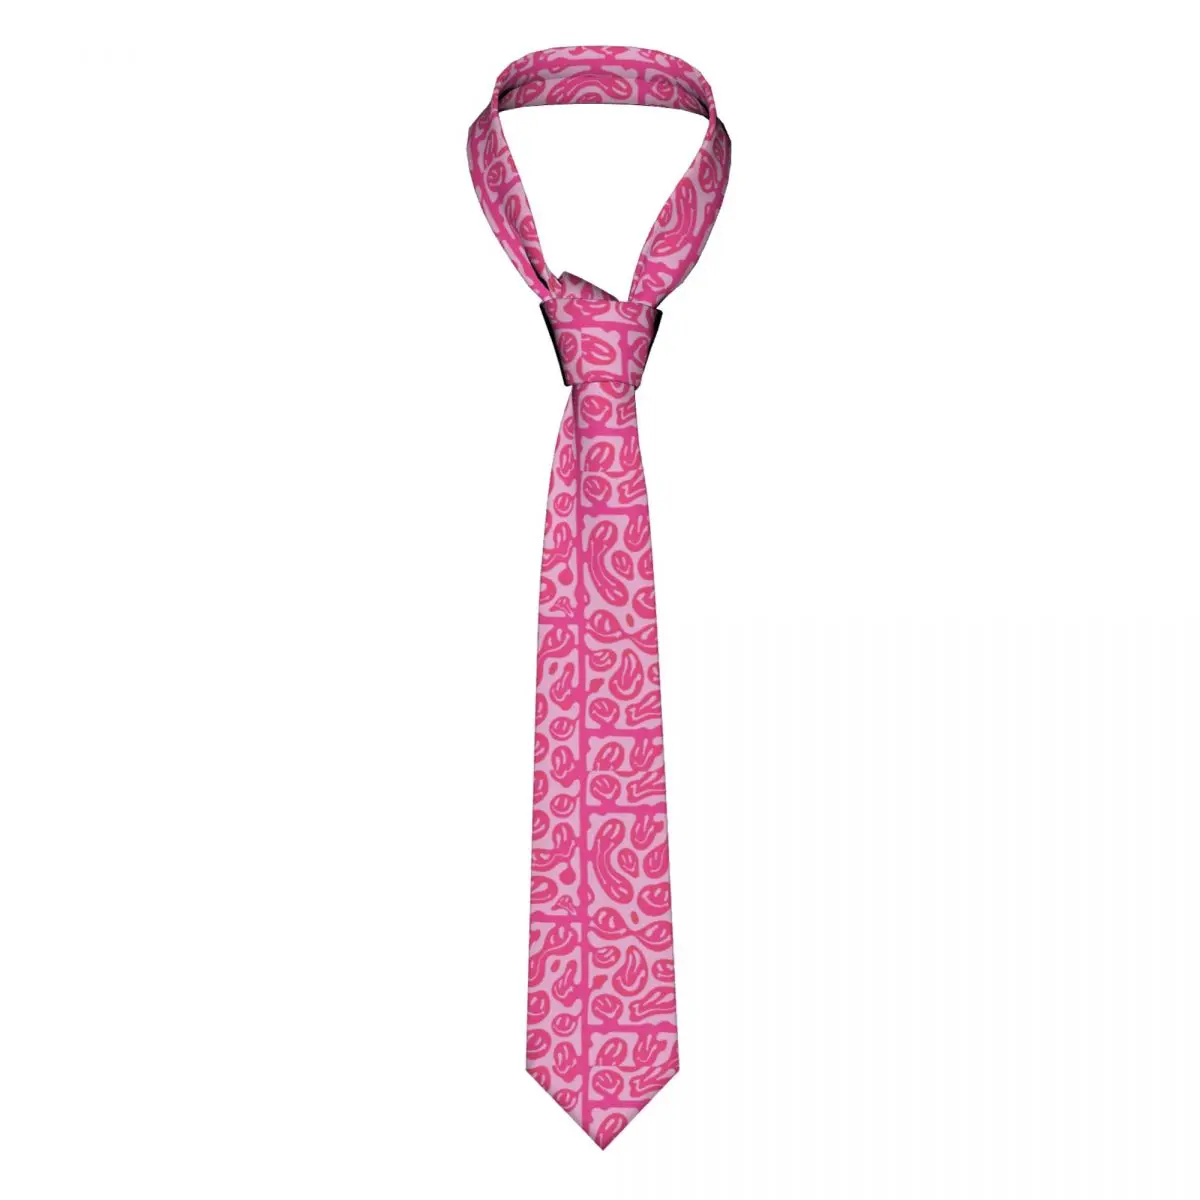 

Hot Pink Melted Smile Face Necktie Unisex Polyester 8 cm Aesthetic Colorful Psychedelic Neck Tie Mens Silk Classic Daily Cravat